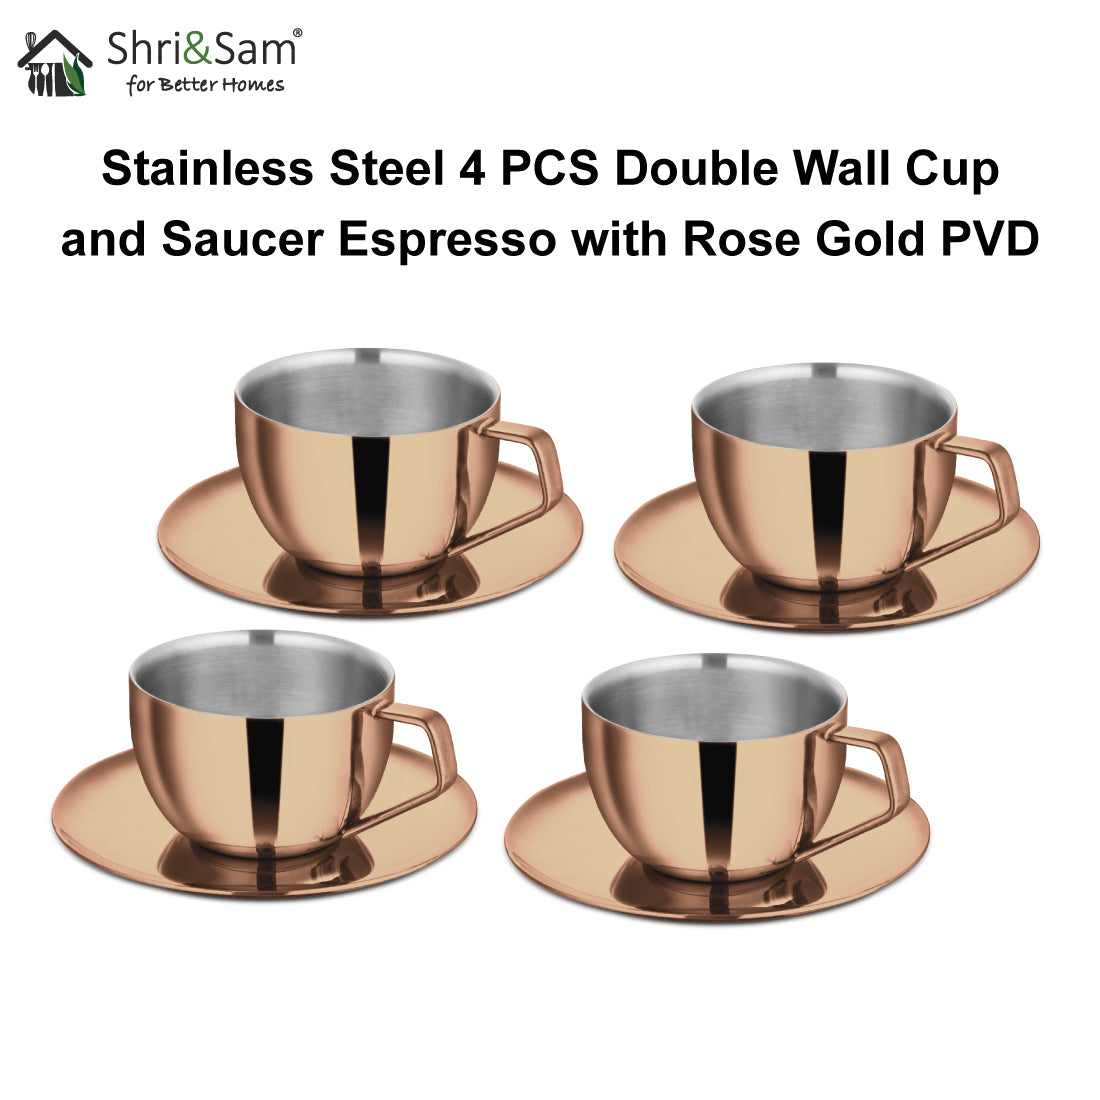 Stainless Steel 4 PCS Double Wall Cup and Saucer with Rose Gold PVD Coating Espresso